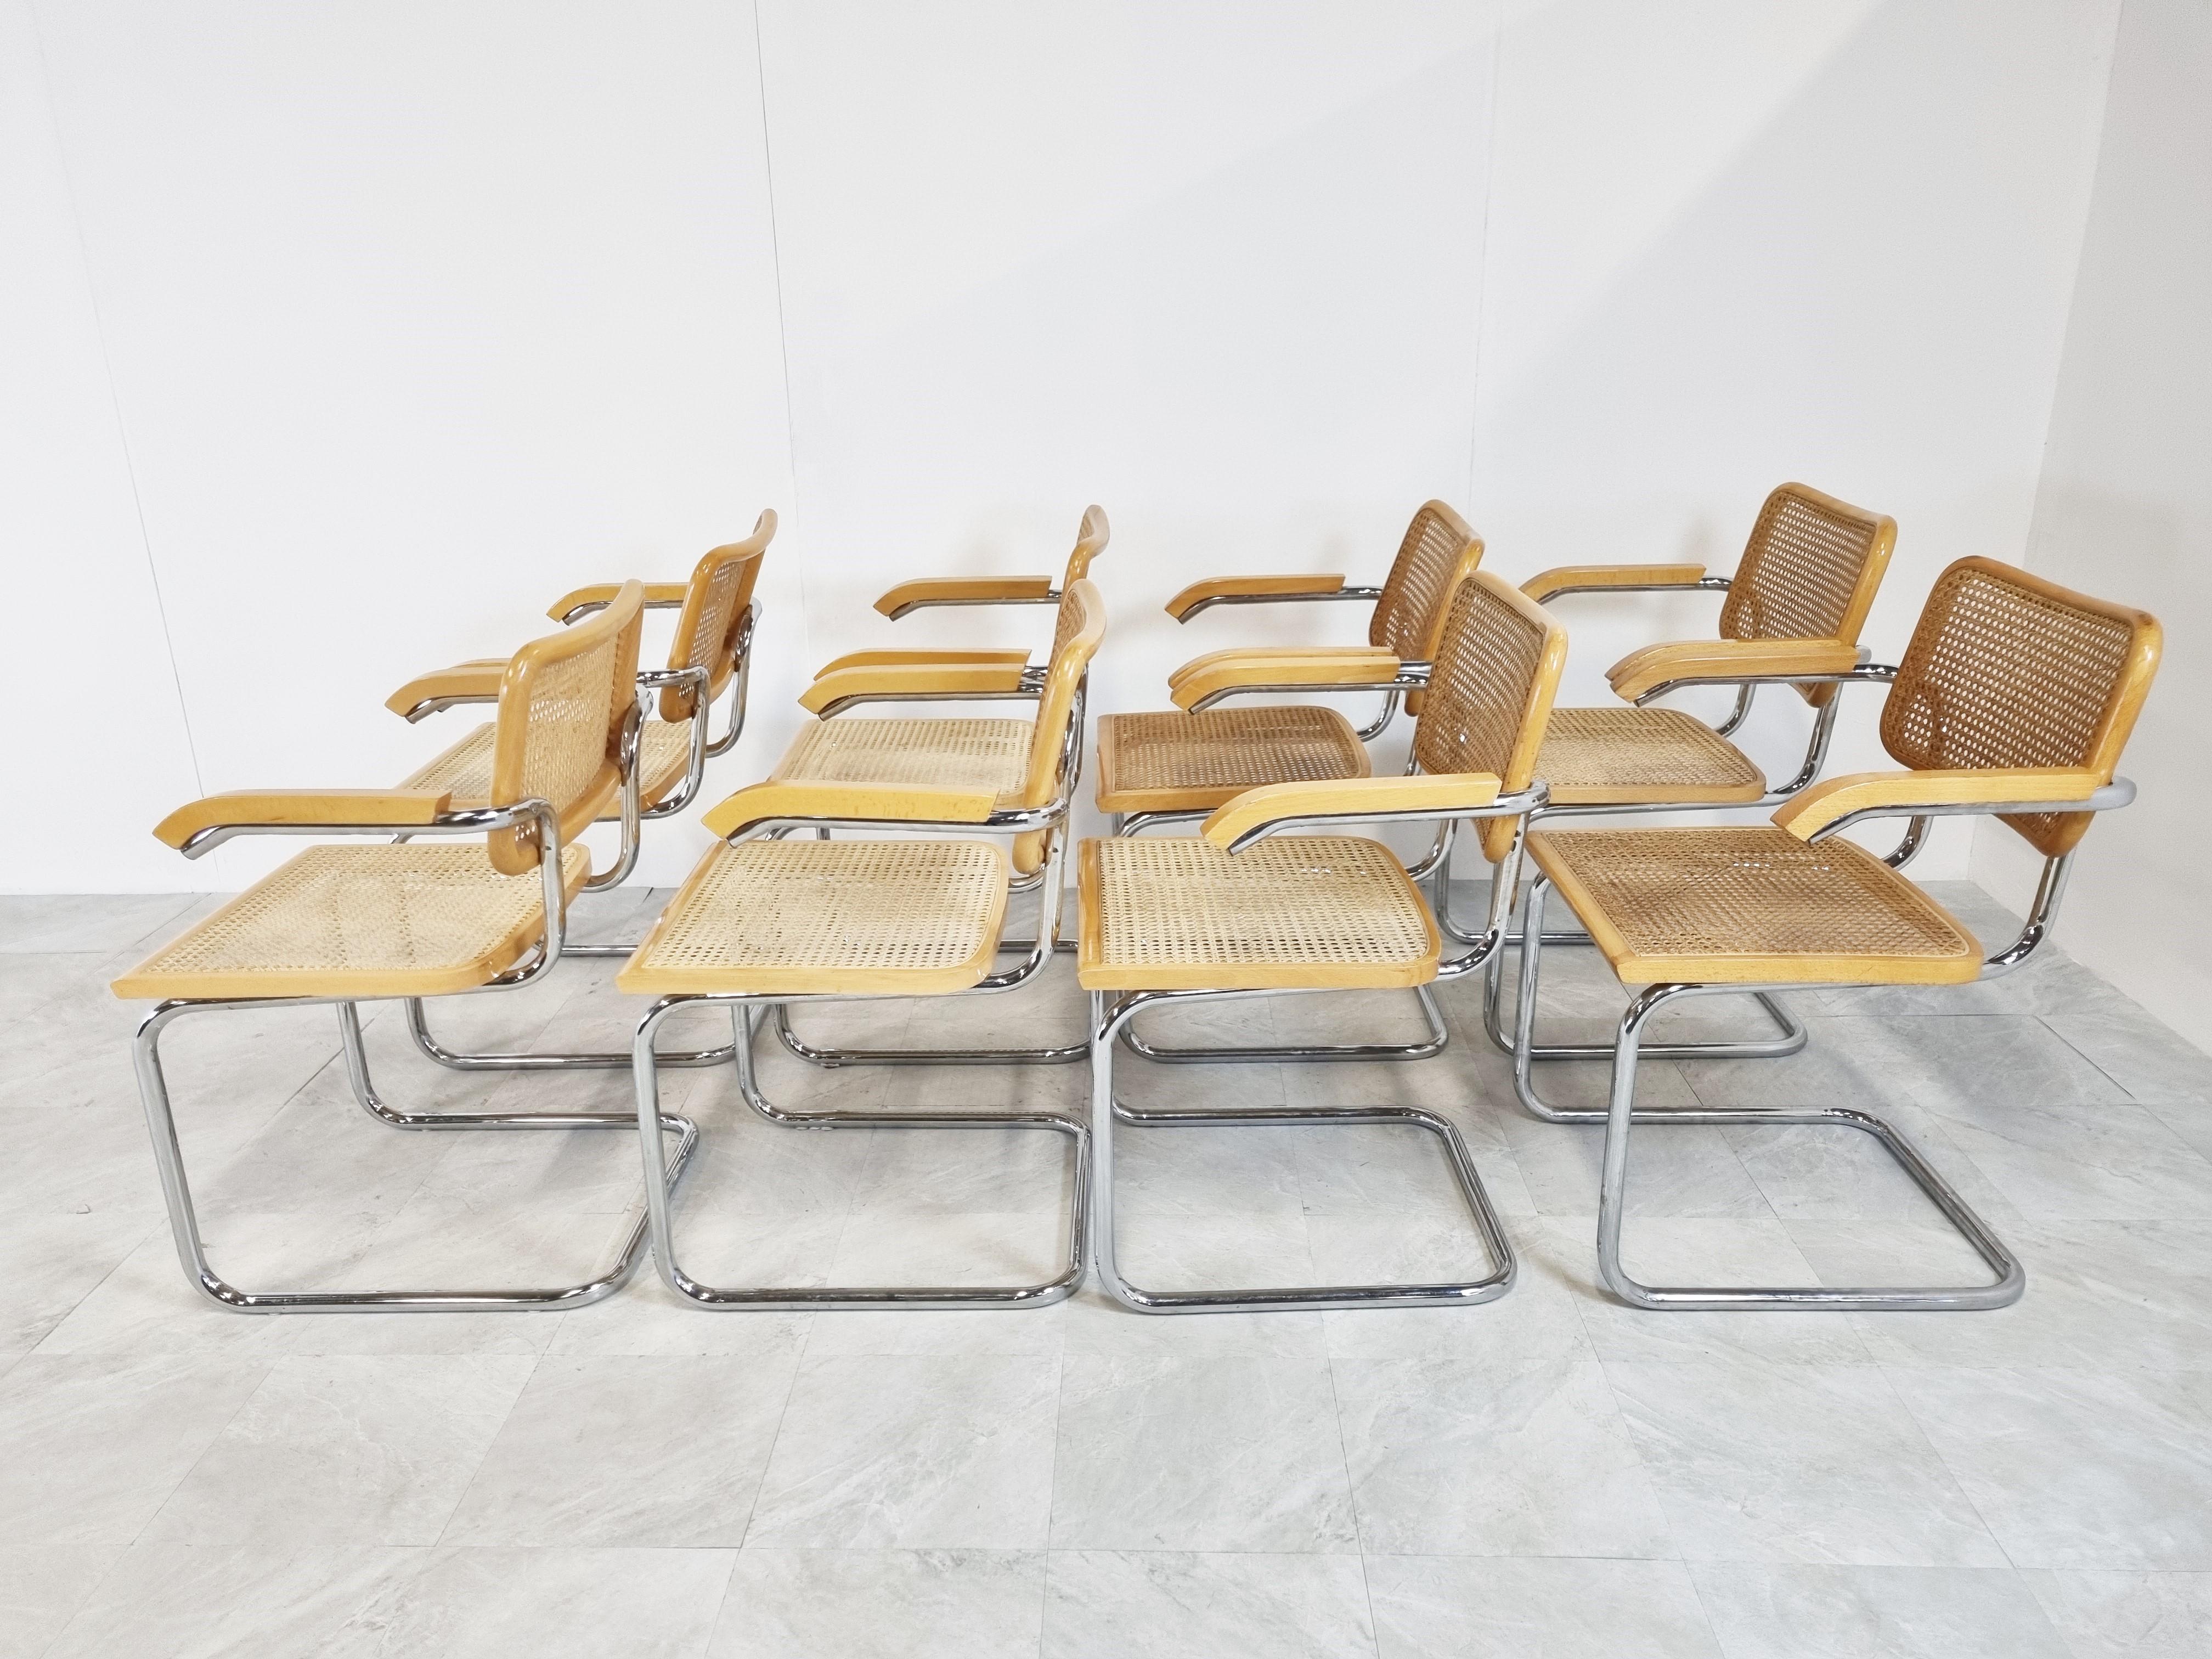 Italian Set of 8 Vintage Marcel Breuer Style Armchairs, Made in Italy, 1970s